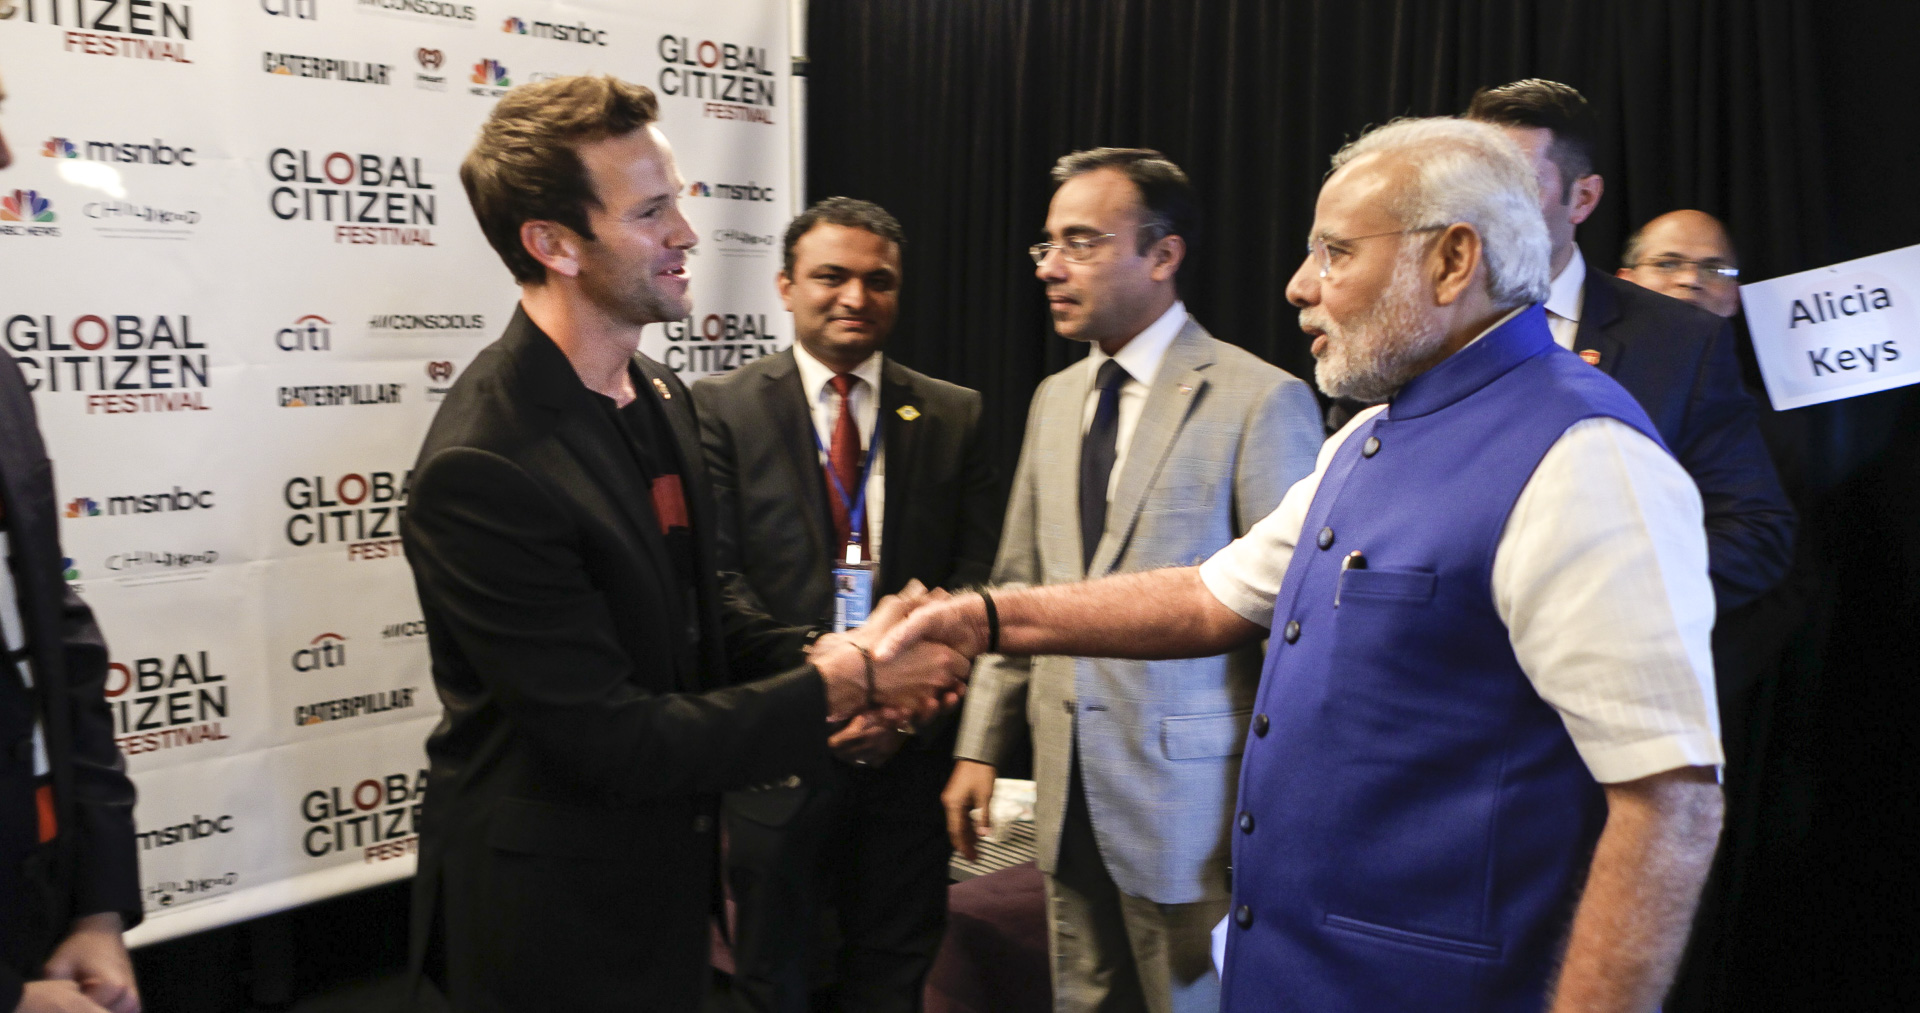 Former Illinois Rep. Aaron Schock with indian Prime Minister Narendra Modi at the Global Citizen Festival